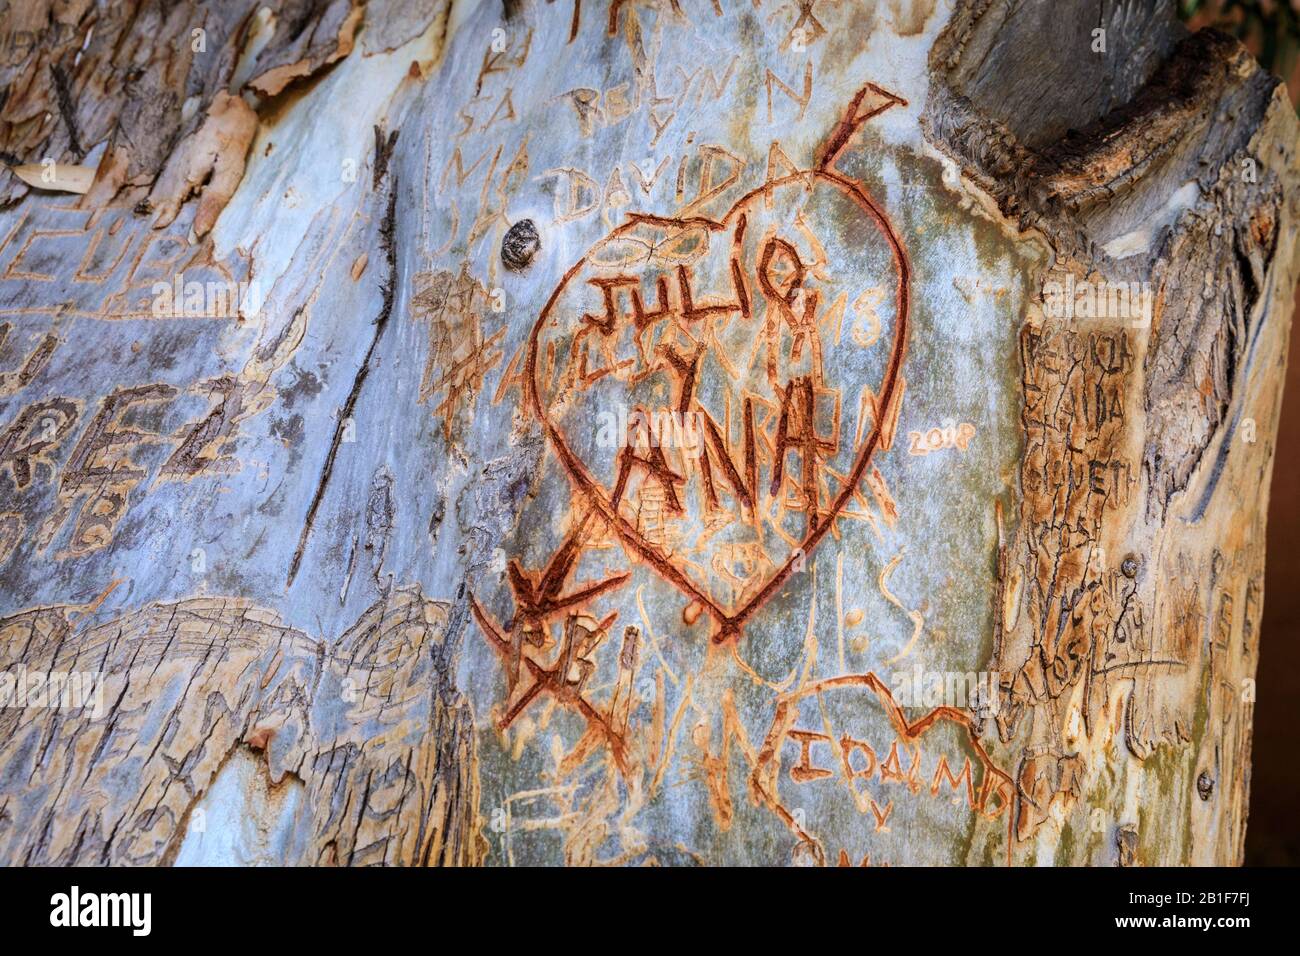 Love heart inscription, initials and love messages carved in to the bark of a tree in Gran canaria Spain Stock Photo